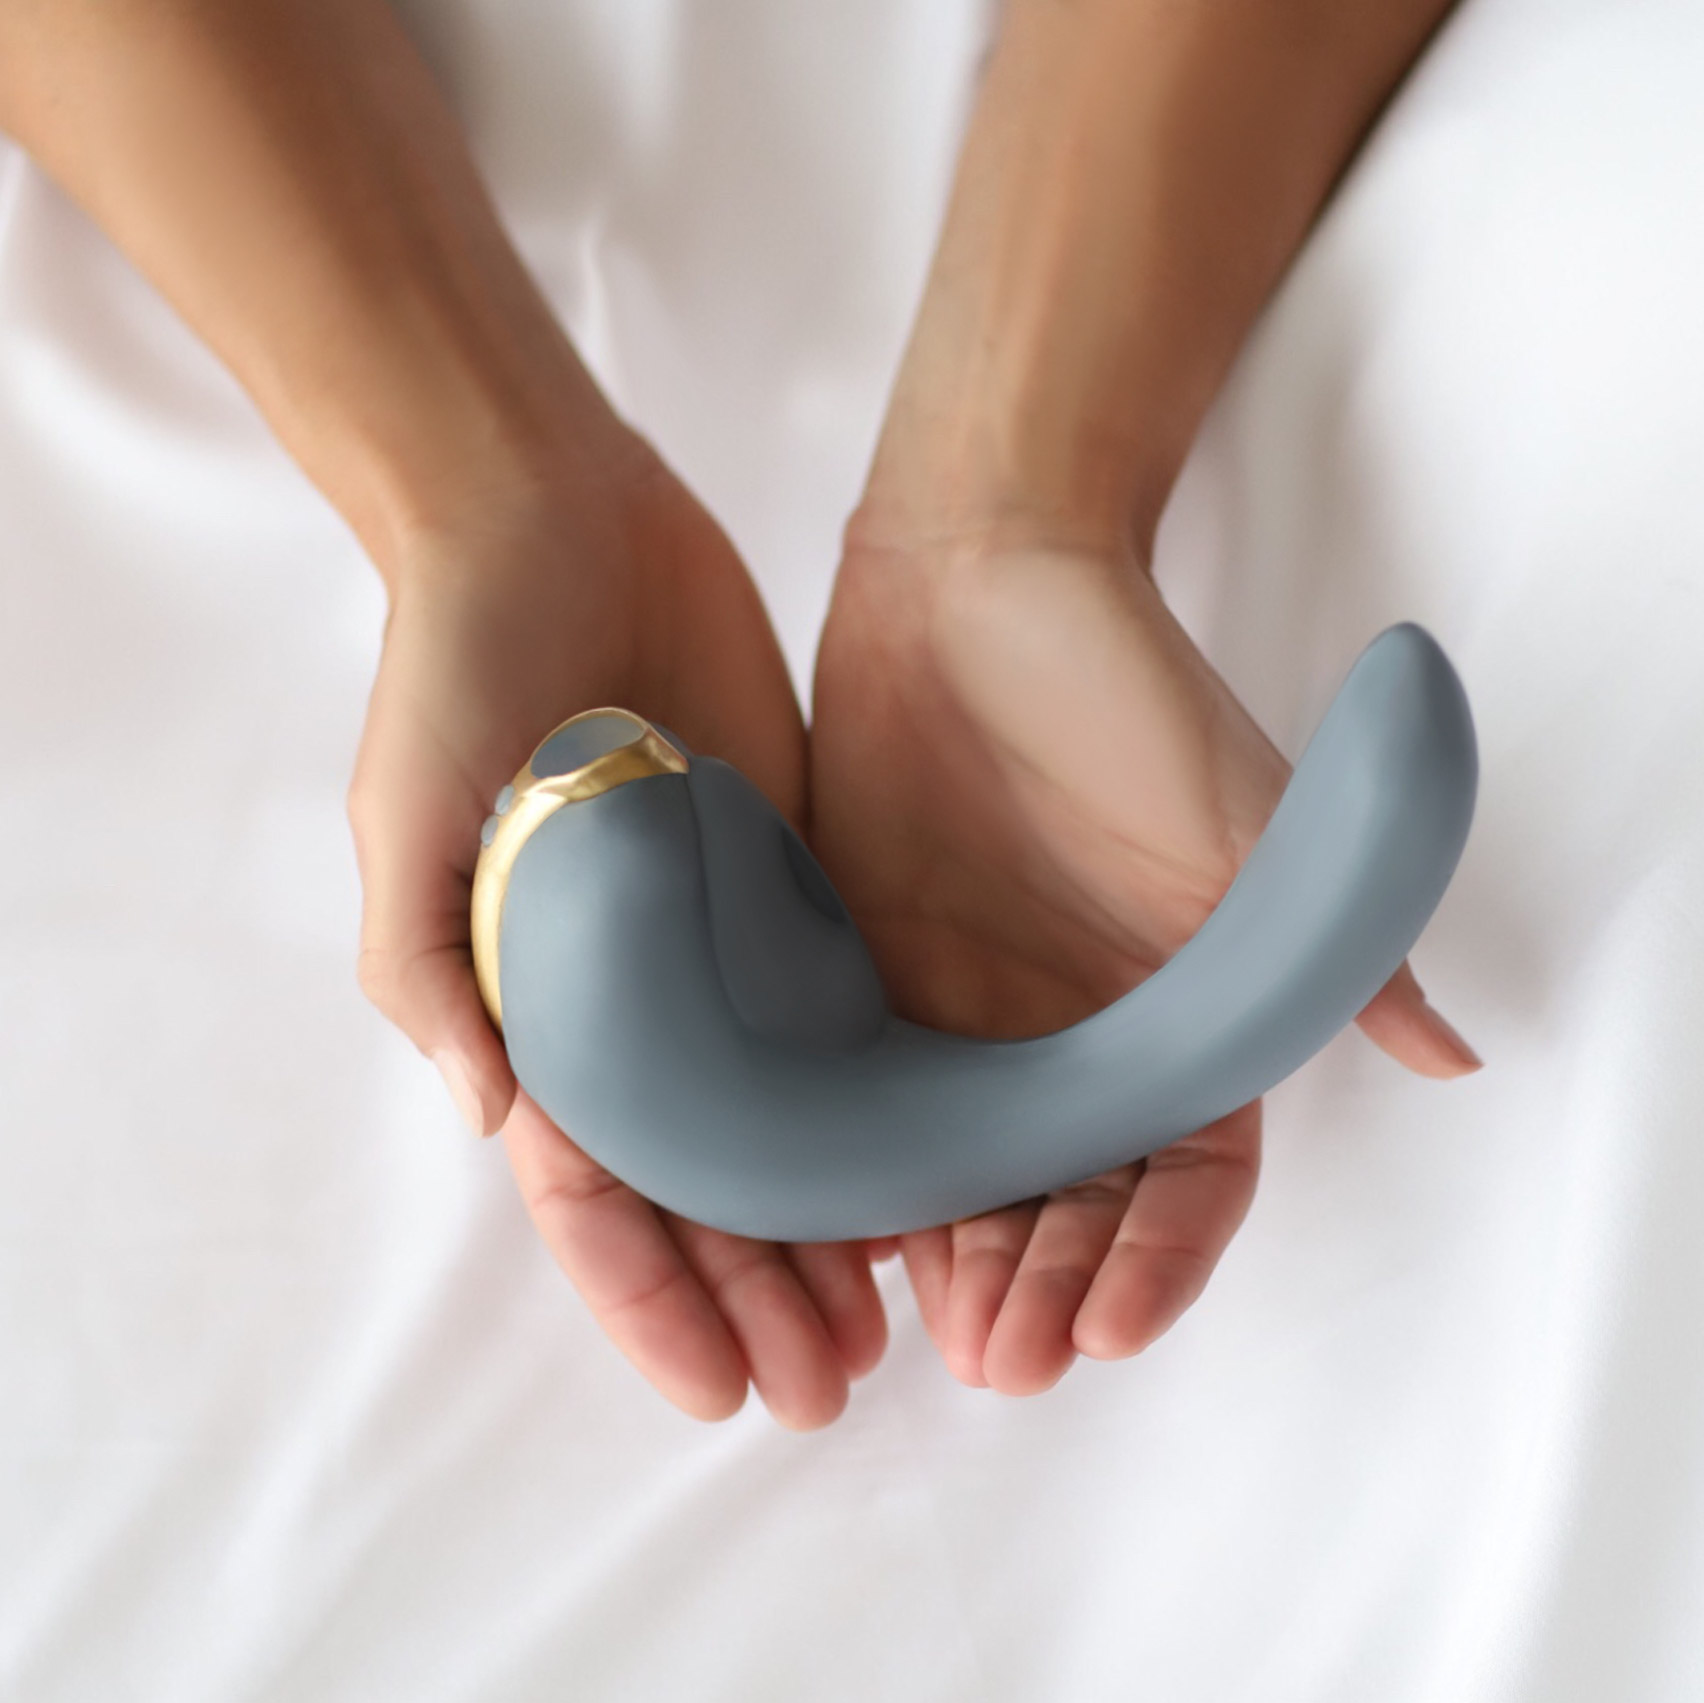 CES restores Lora DiCarlo's sex toy award after sexism outcries